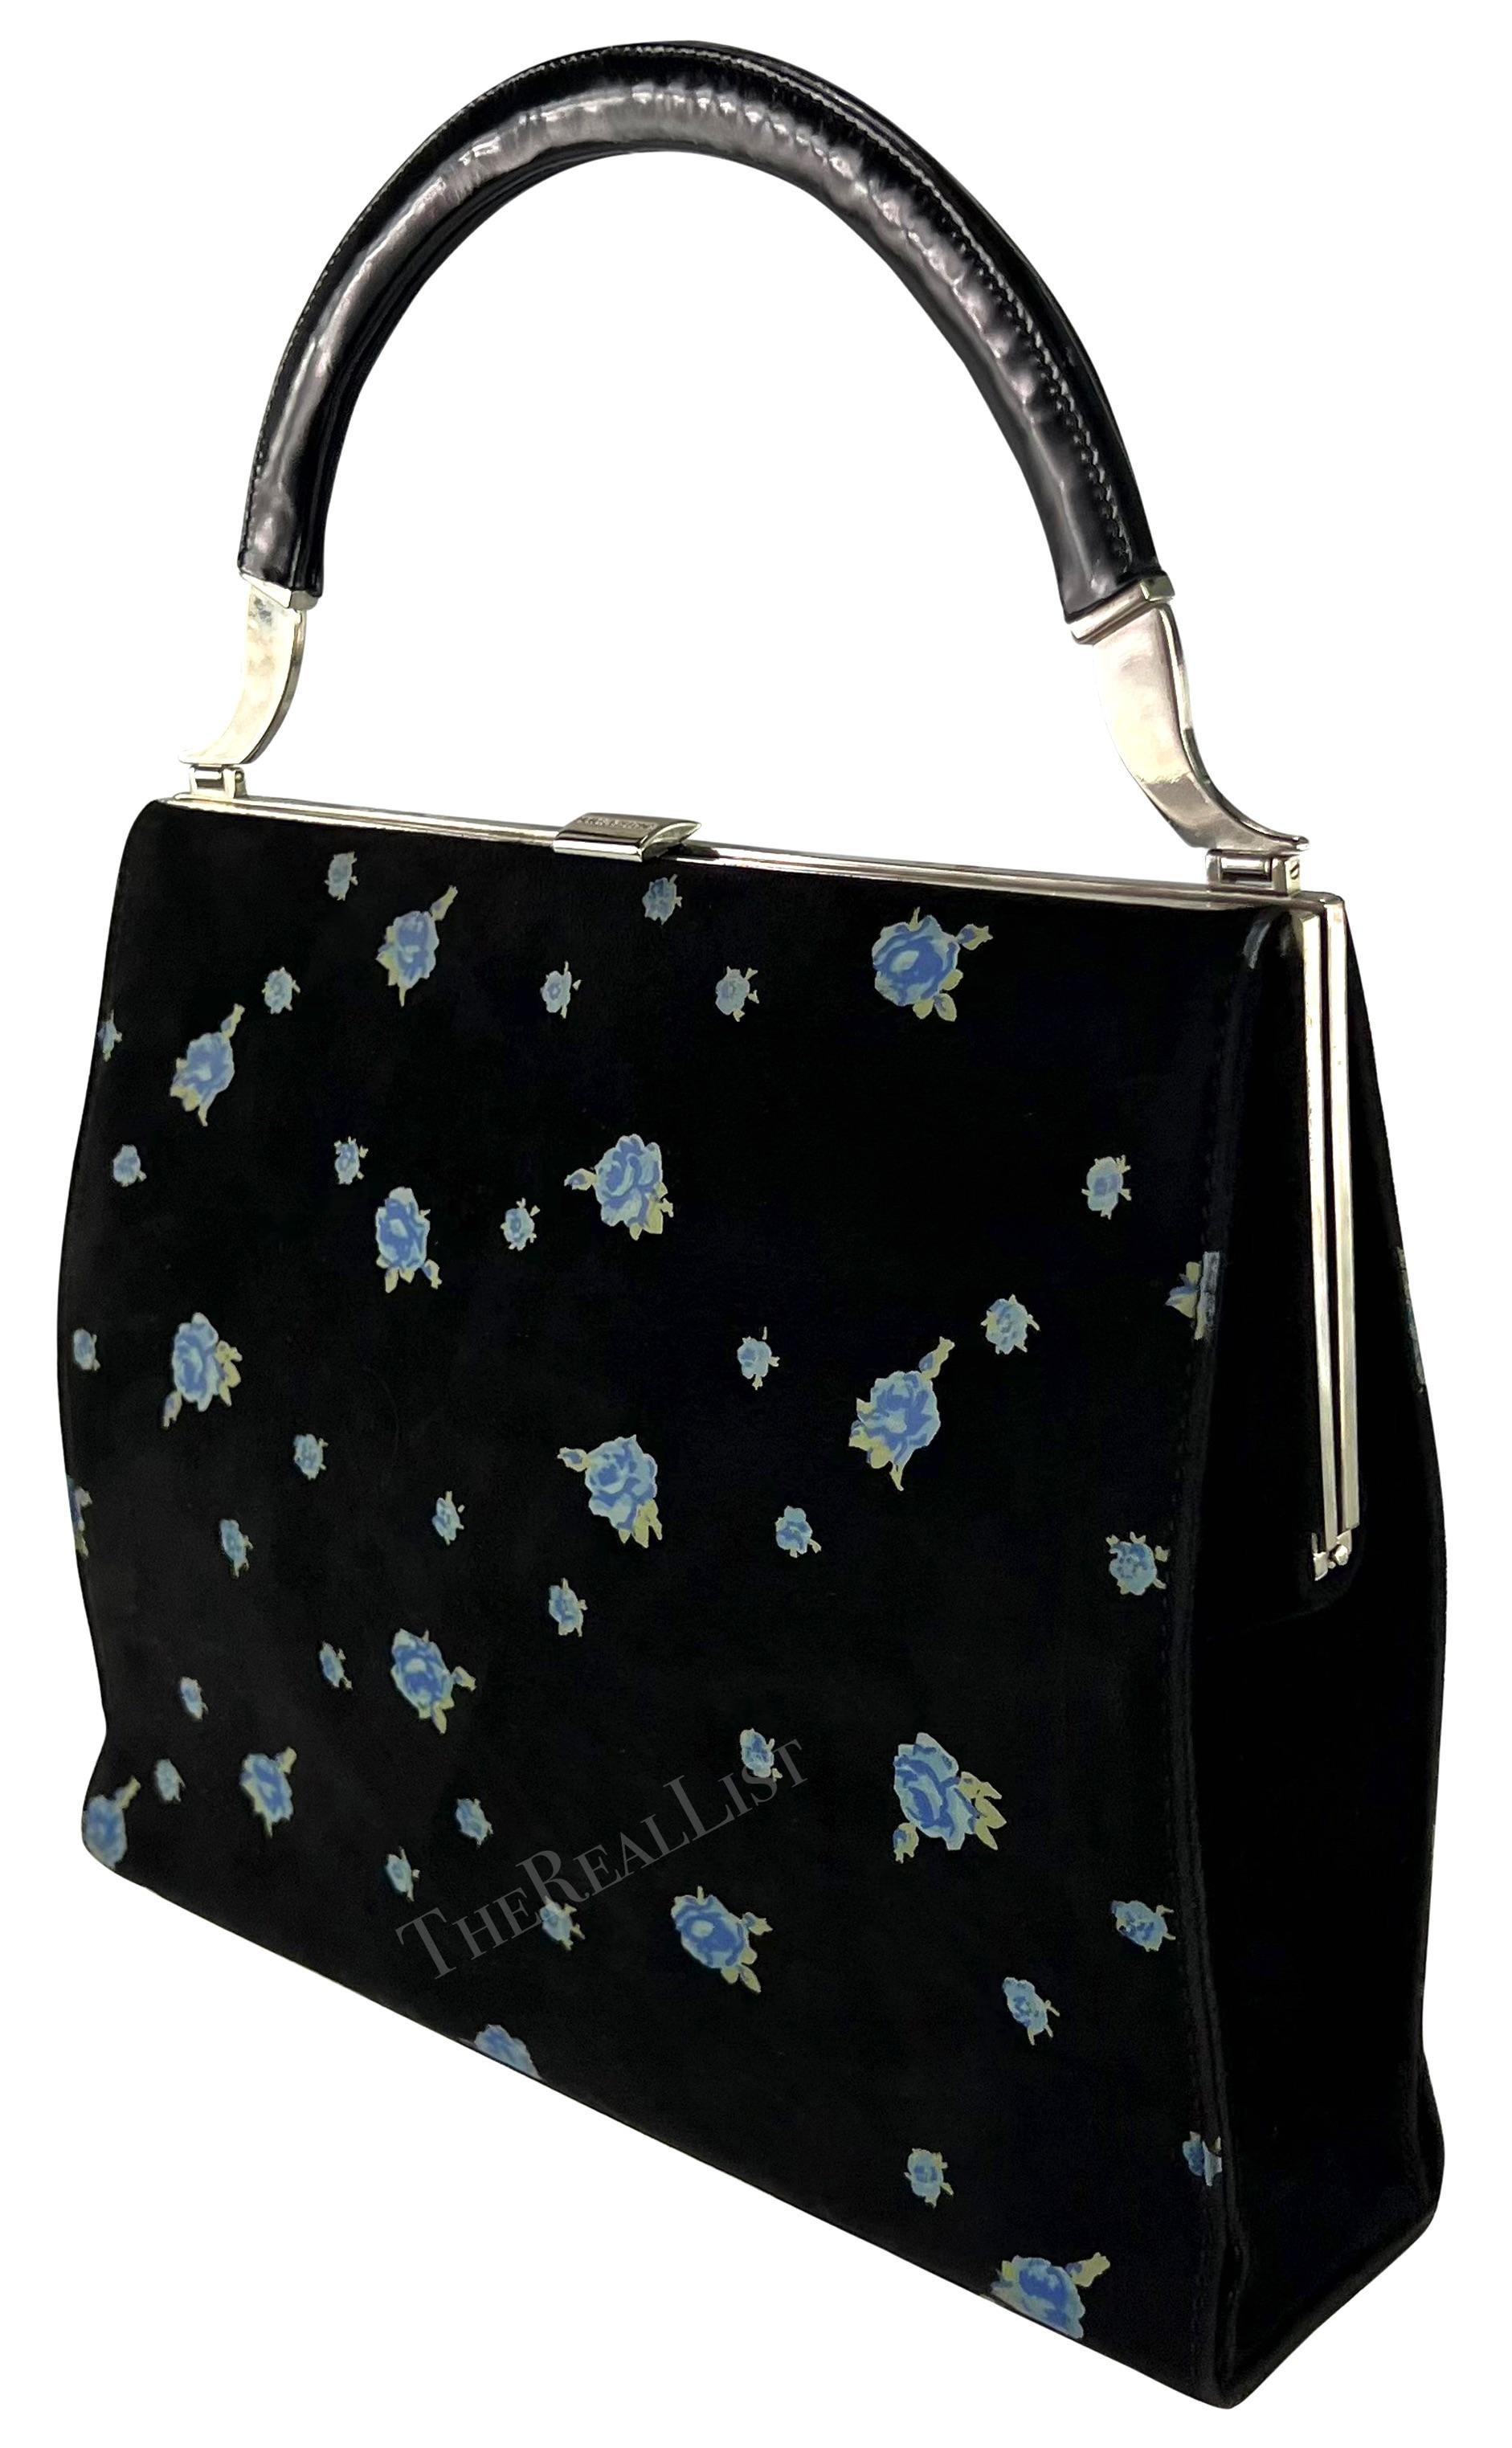 A fabulous black suede Dolce & Gabbana top handle bag from the 1990s. Crafted in suede, this bag showcases a striking blue rose print, The top handle is constructed of a glossy black handle and is made complete with silver-tone accents and a clam